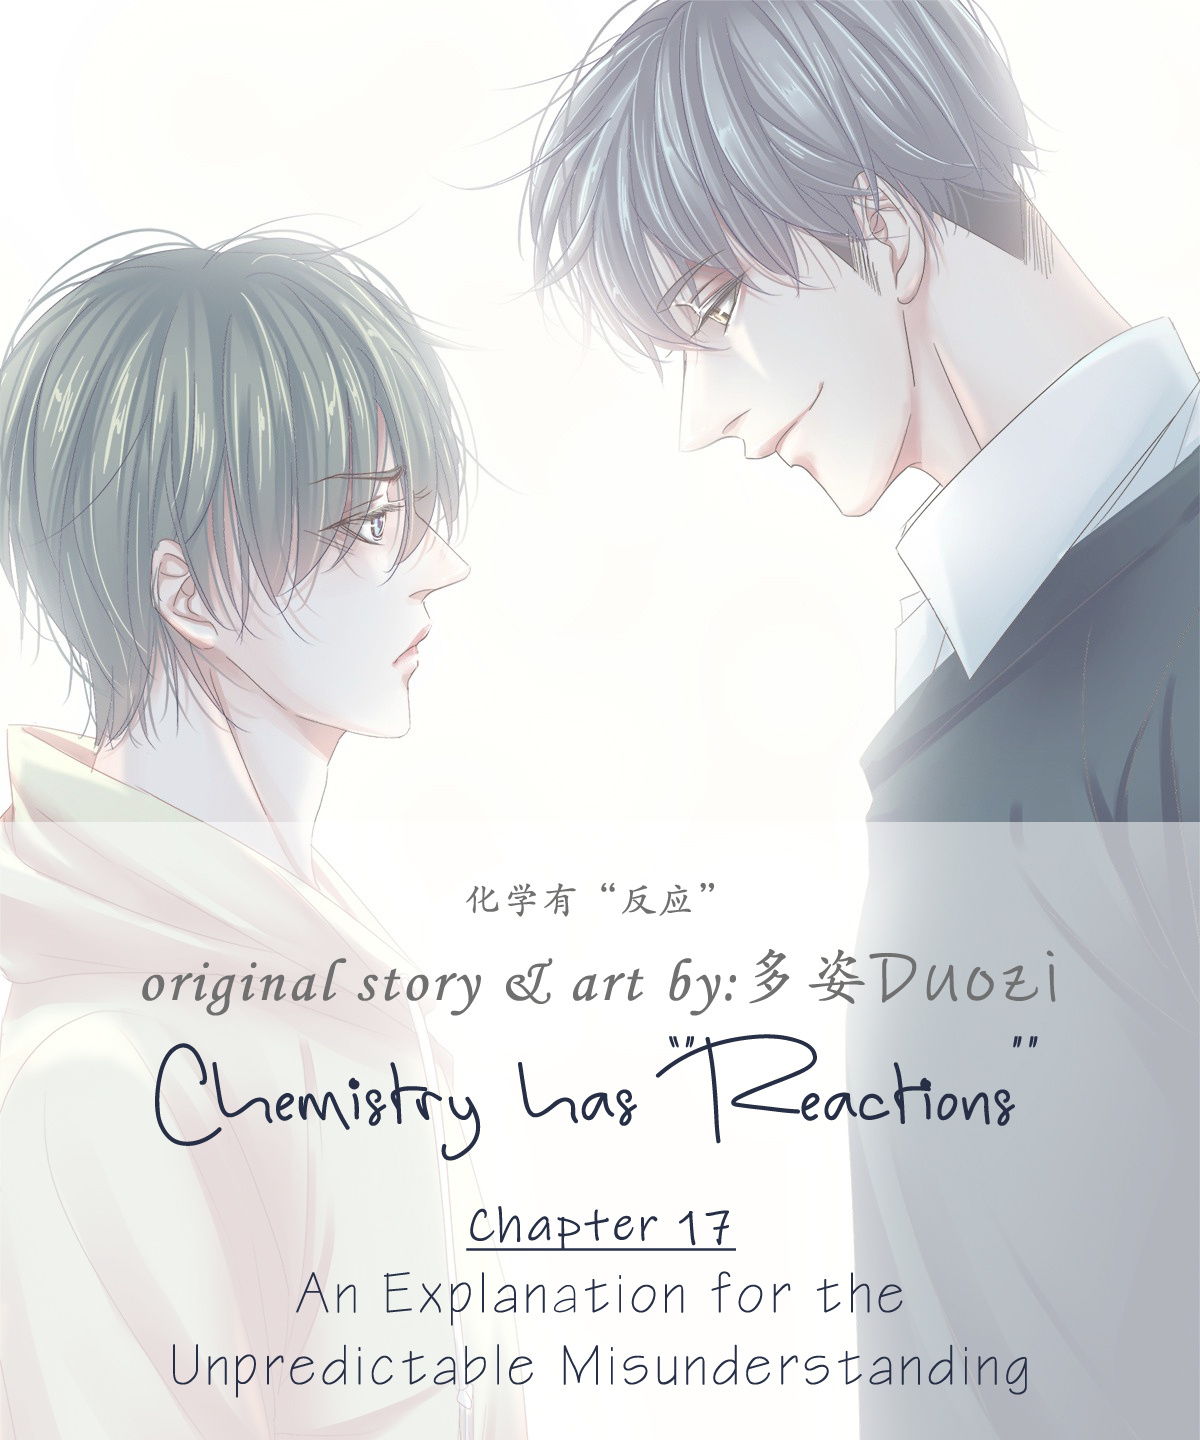 Chemistry Has "reactions" Chapter 17 #1